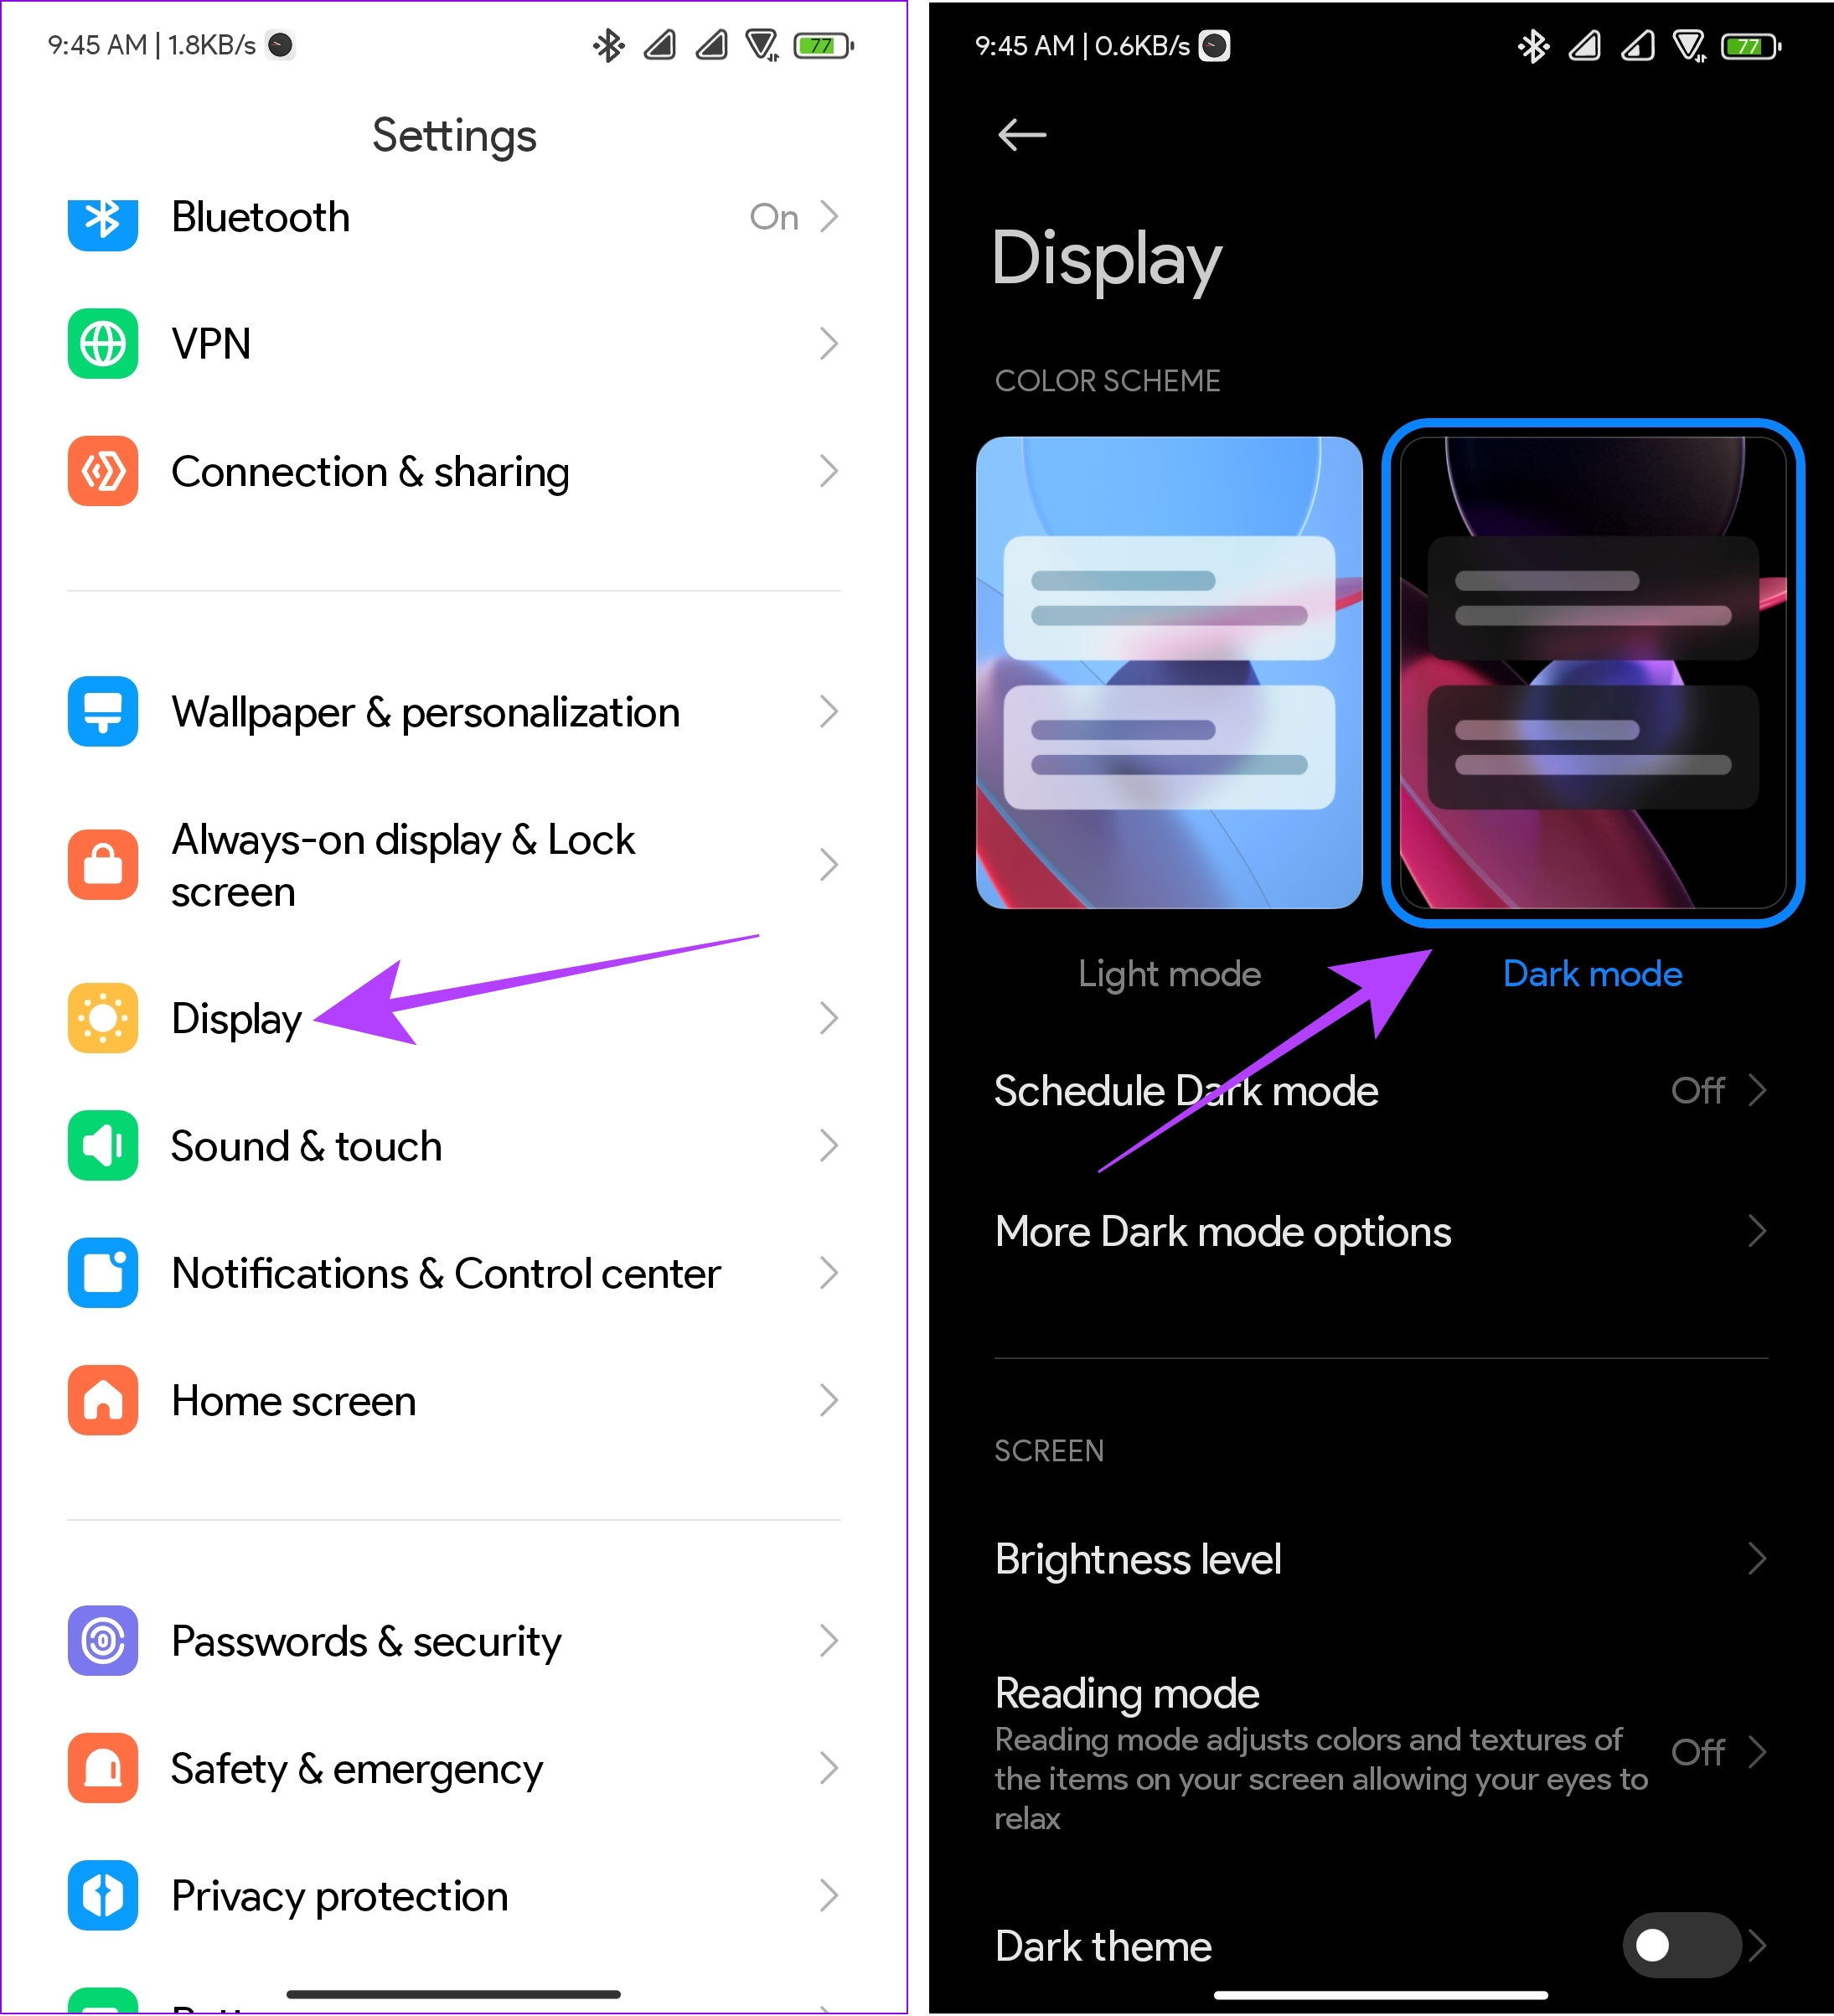 open settings and tap display and choose dark mode